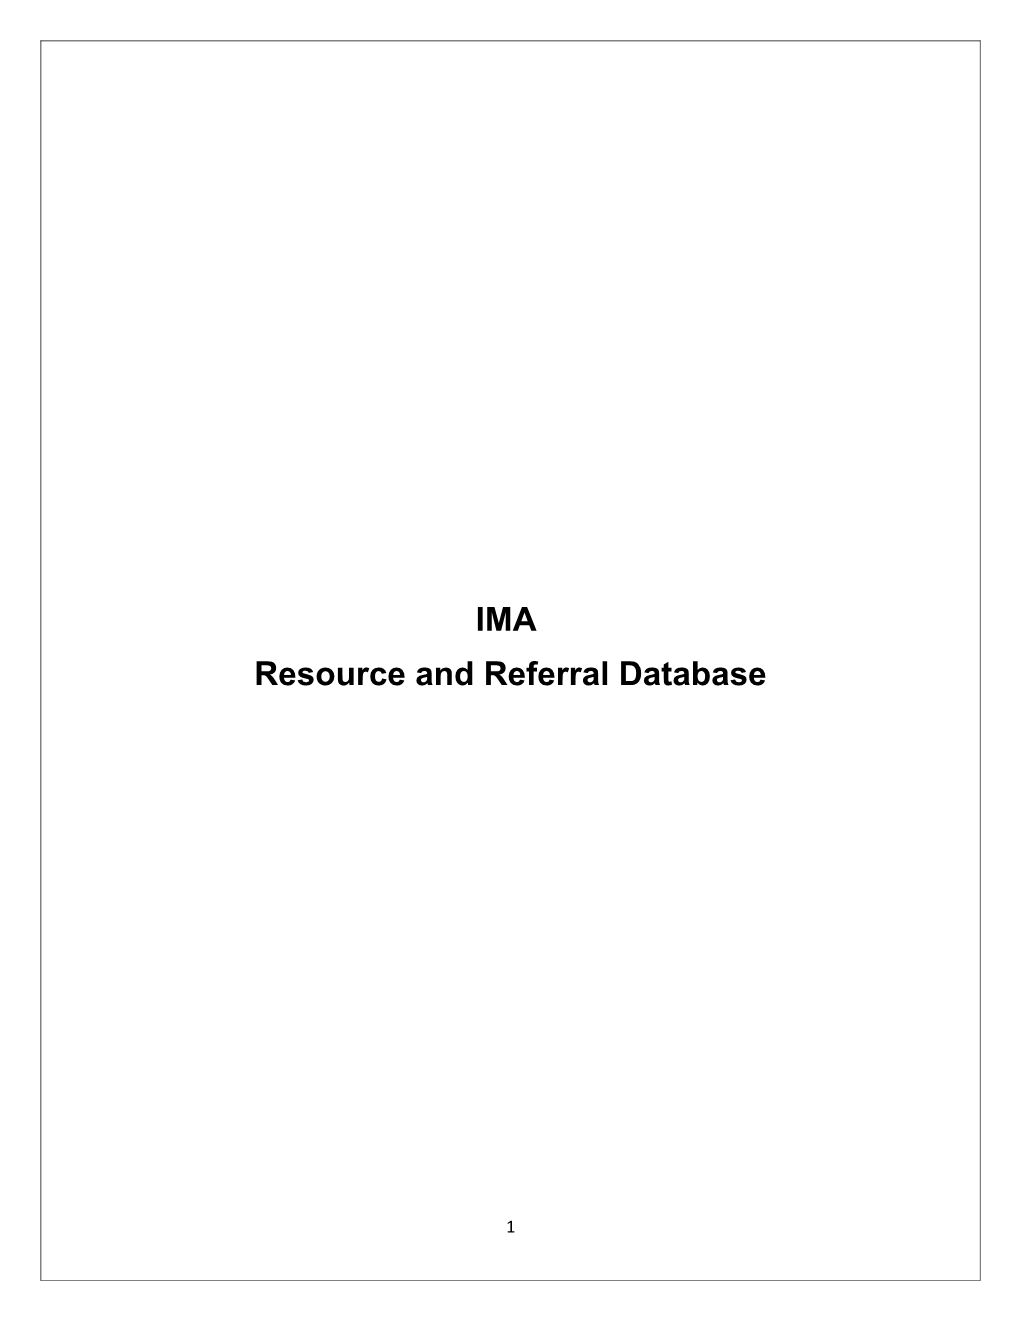 Resource and Referral Database